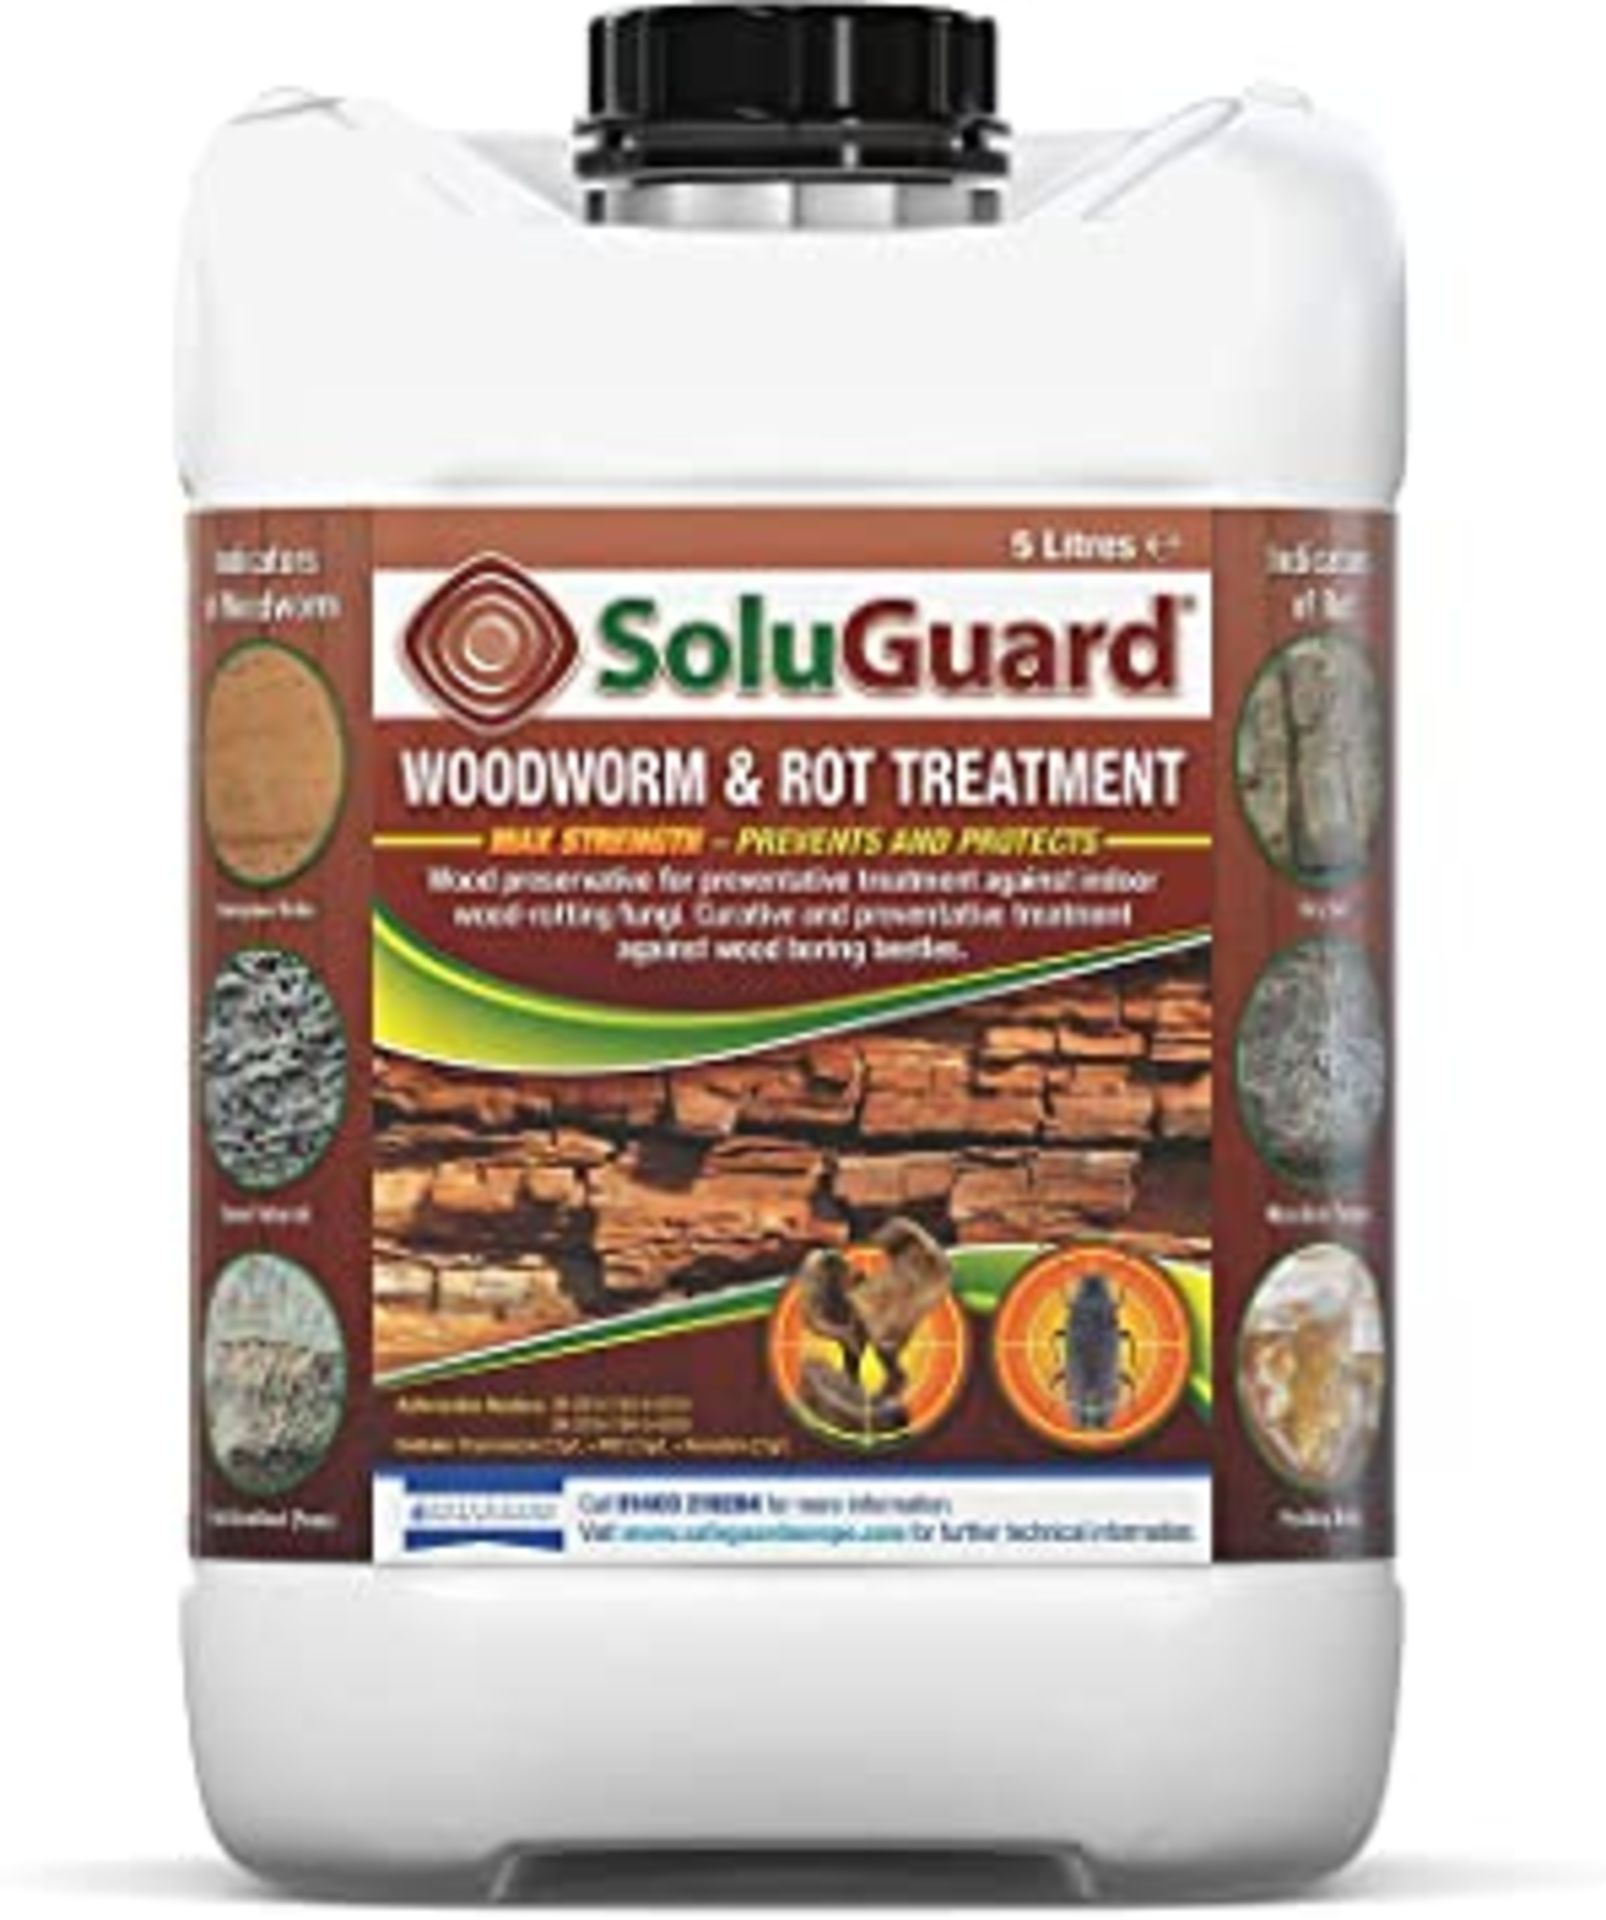 RRP - £30.39 SAFEGUARD Woodworm & Rot Treatment 5 Litre Clear Soluguard Ready to Use (Clear) - Image 2 of 2